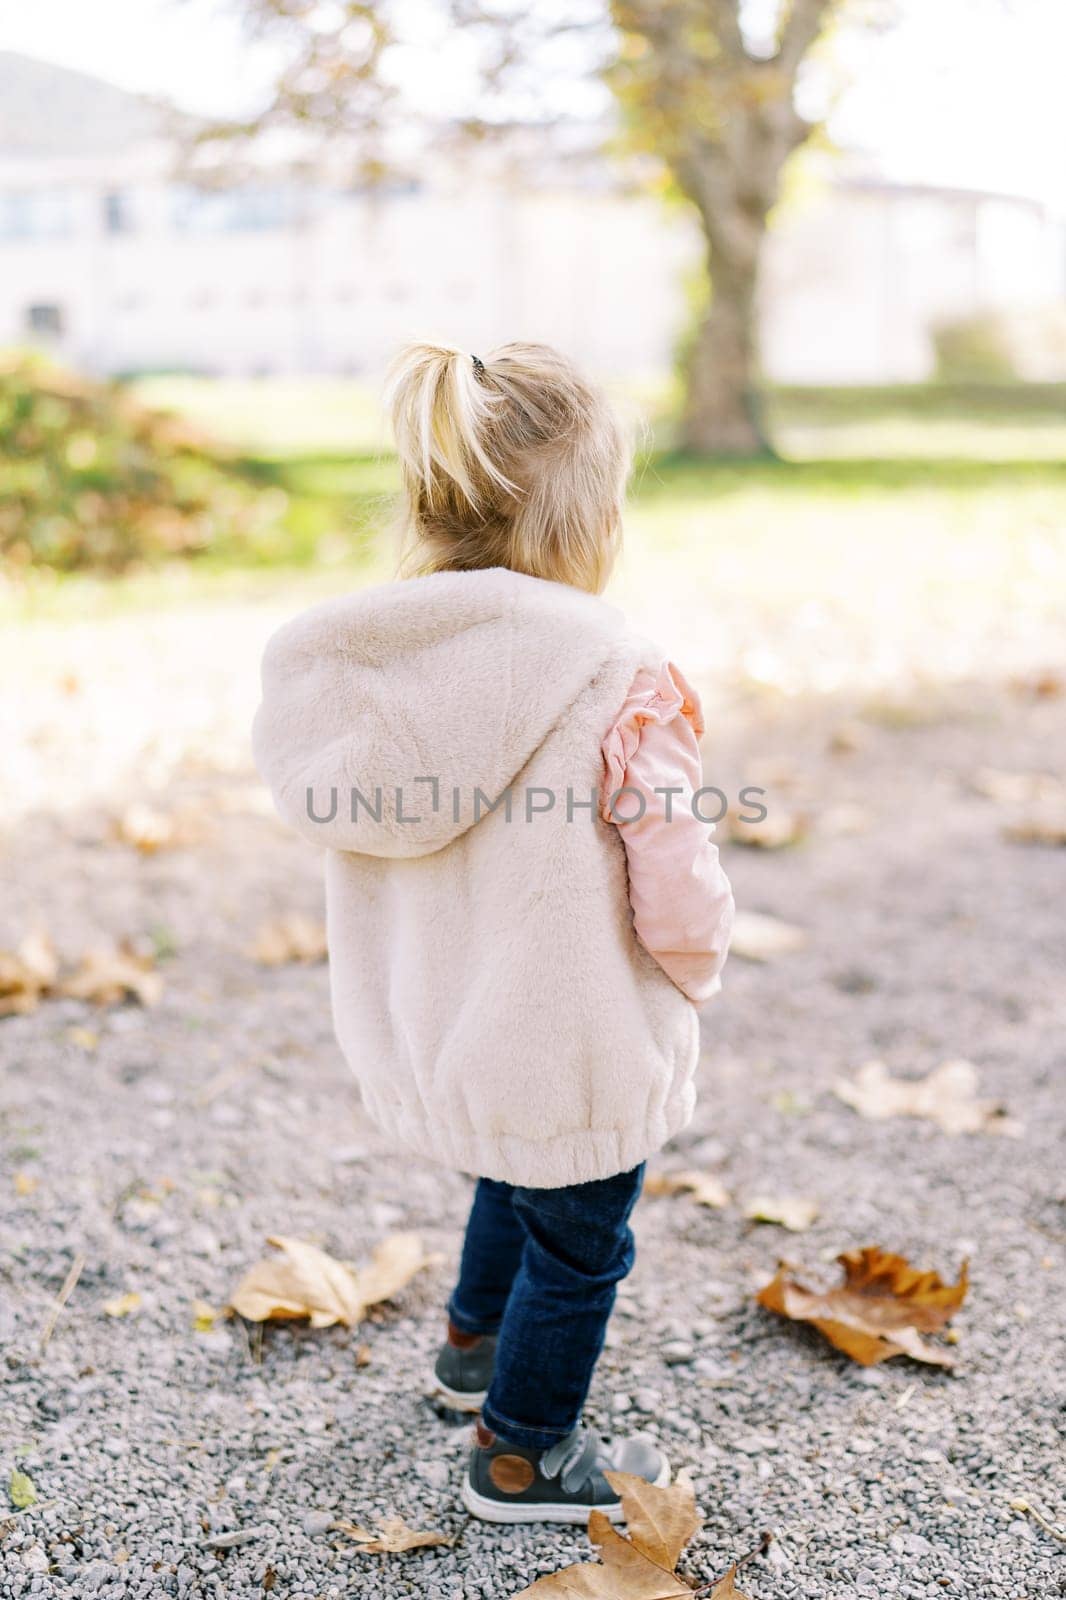 Little girl in a fur vest stands on a path among fallen leaves. Back view. High quality photo